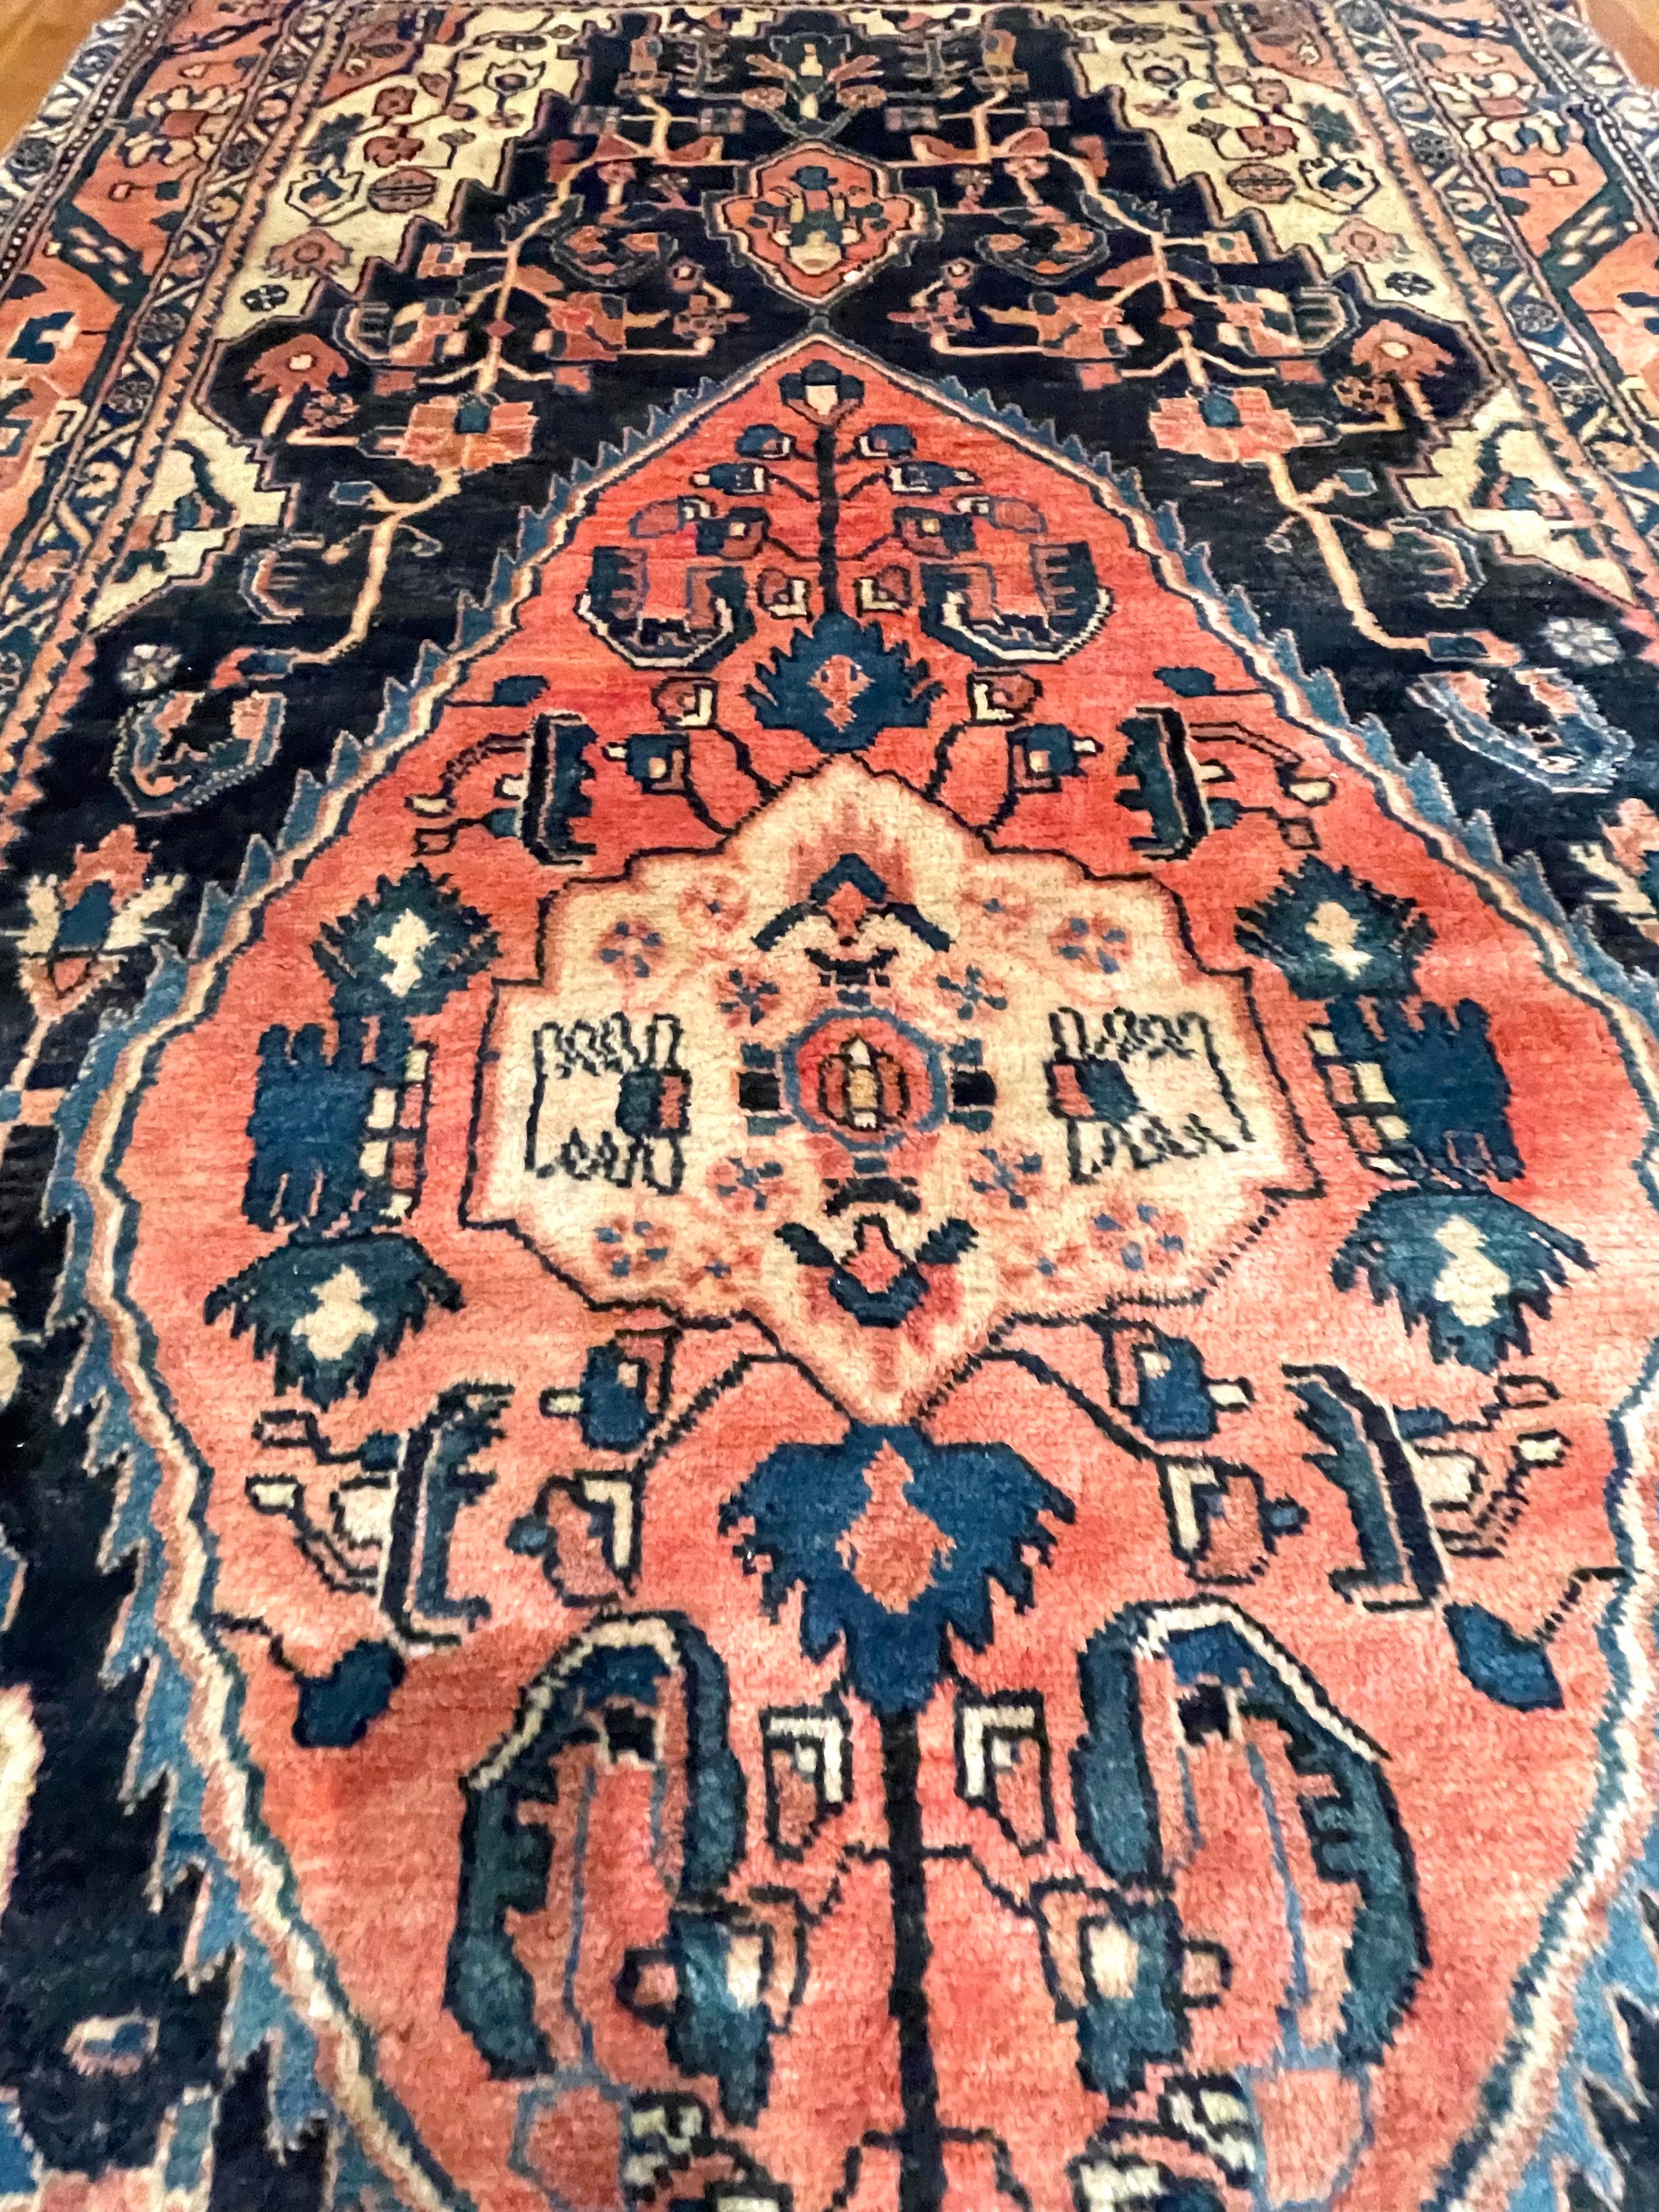 Hamadan is one of the largest weaving areas in the region and encompasses hundreds of villages. Each one of these villages has its own characteristic weaving tradition that dictates the patterns and sizes of the rugs made there. This stunning